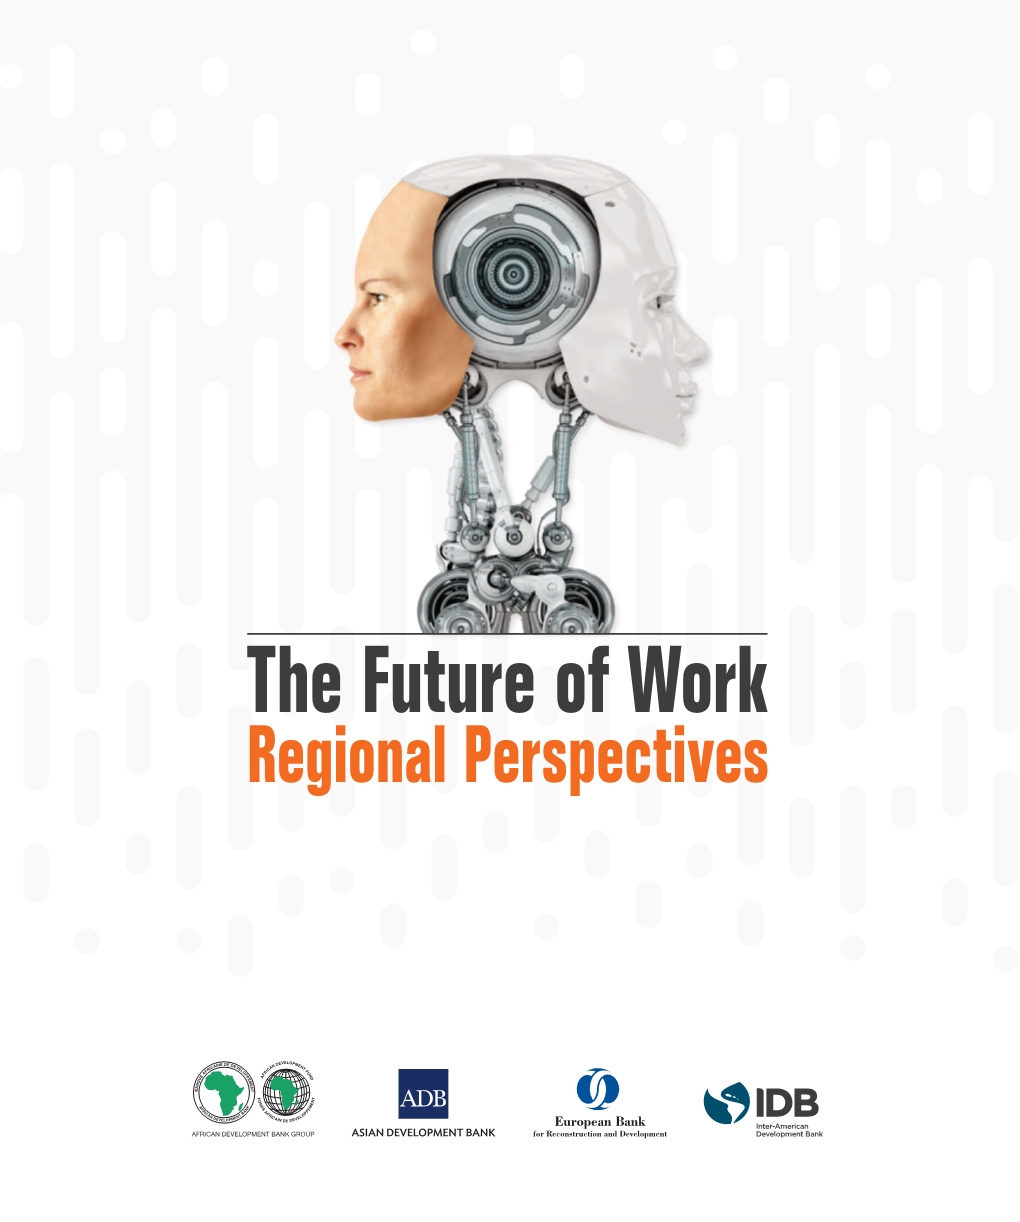 The Future of Work: Regional Perspectives